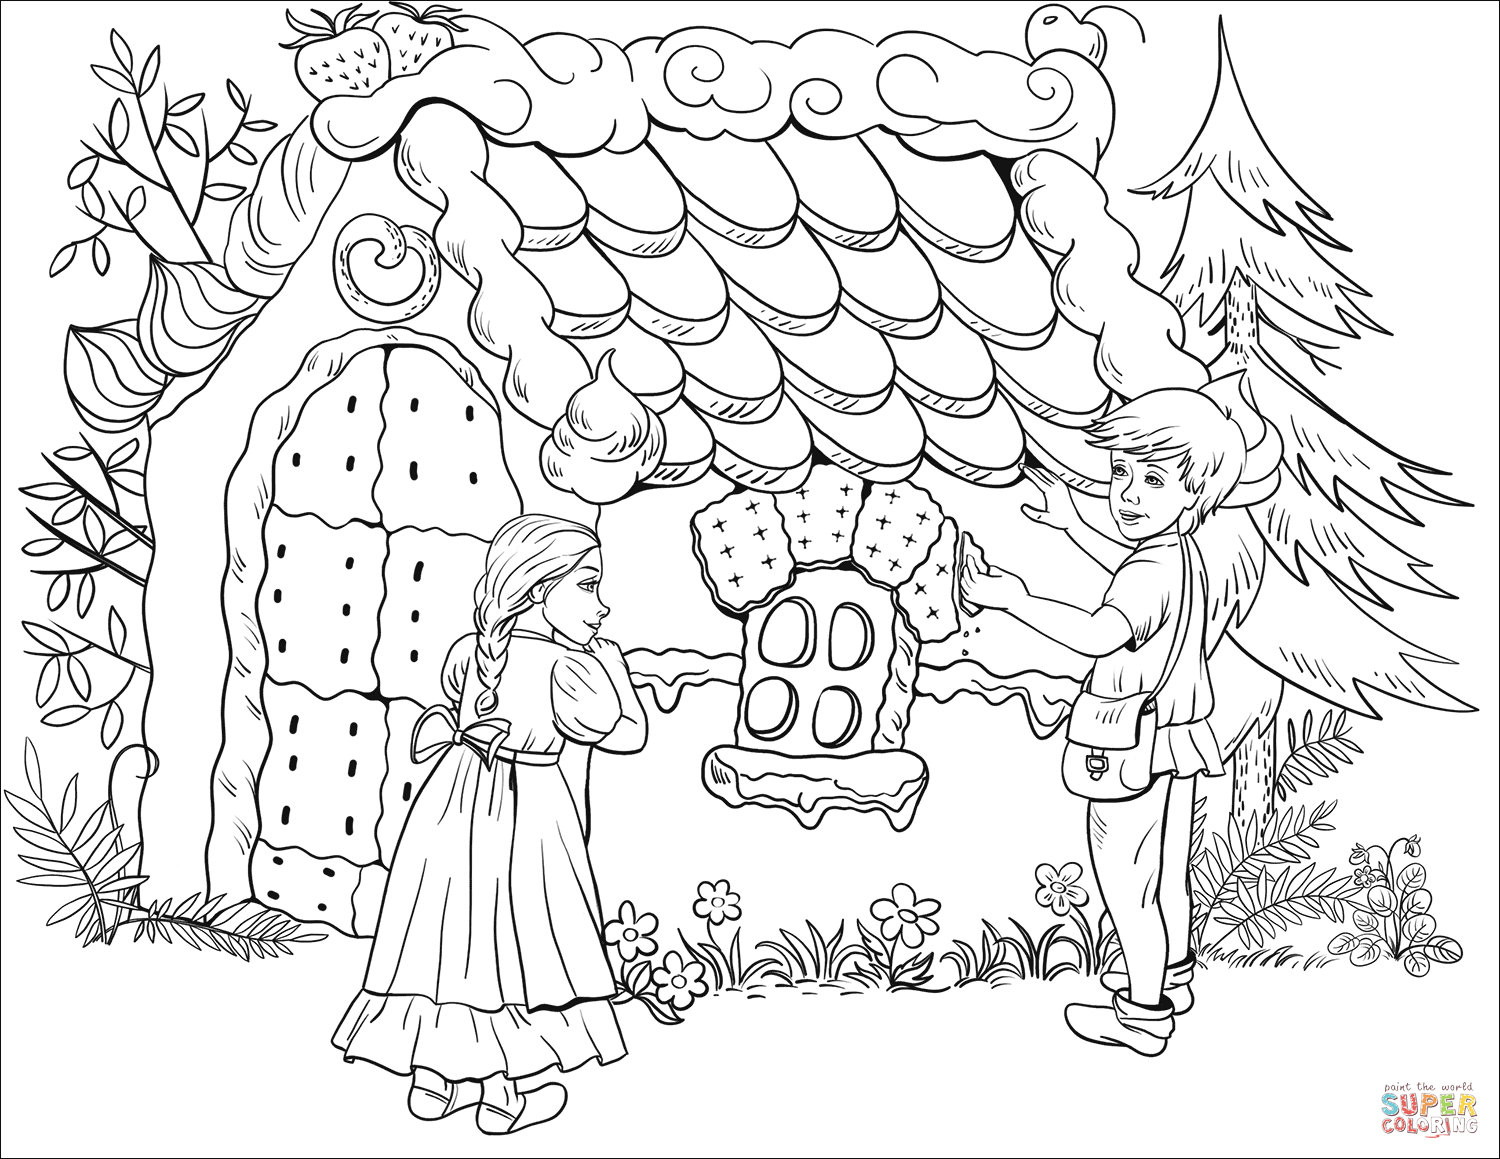 Hansel Tastes A Bit Of The Roof Of The Gingerbread House à Coloriage Hansel Et Gretel